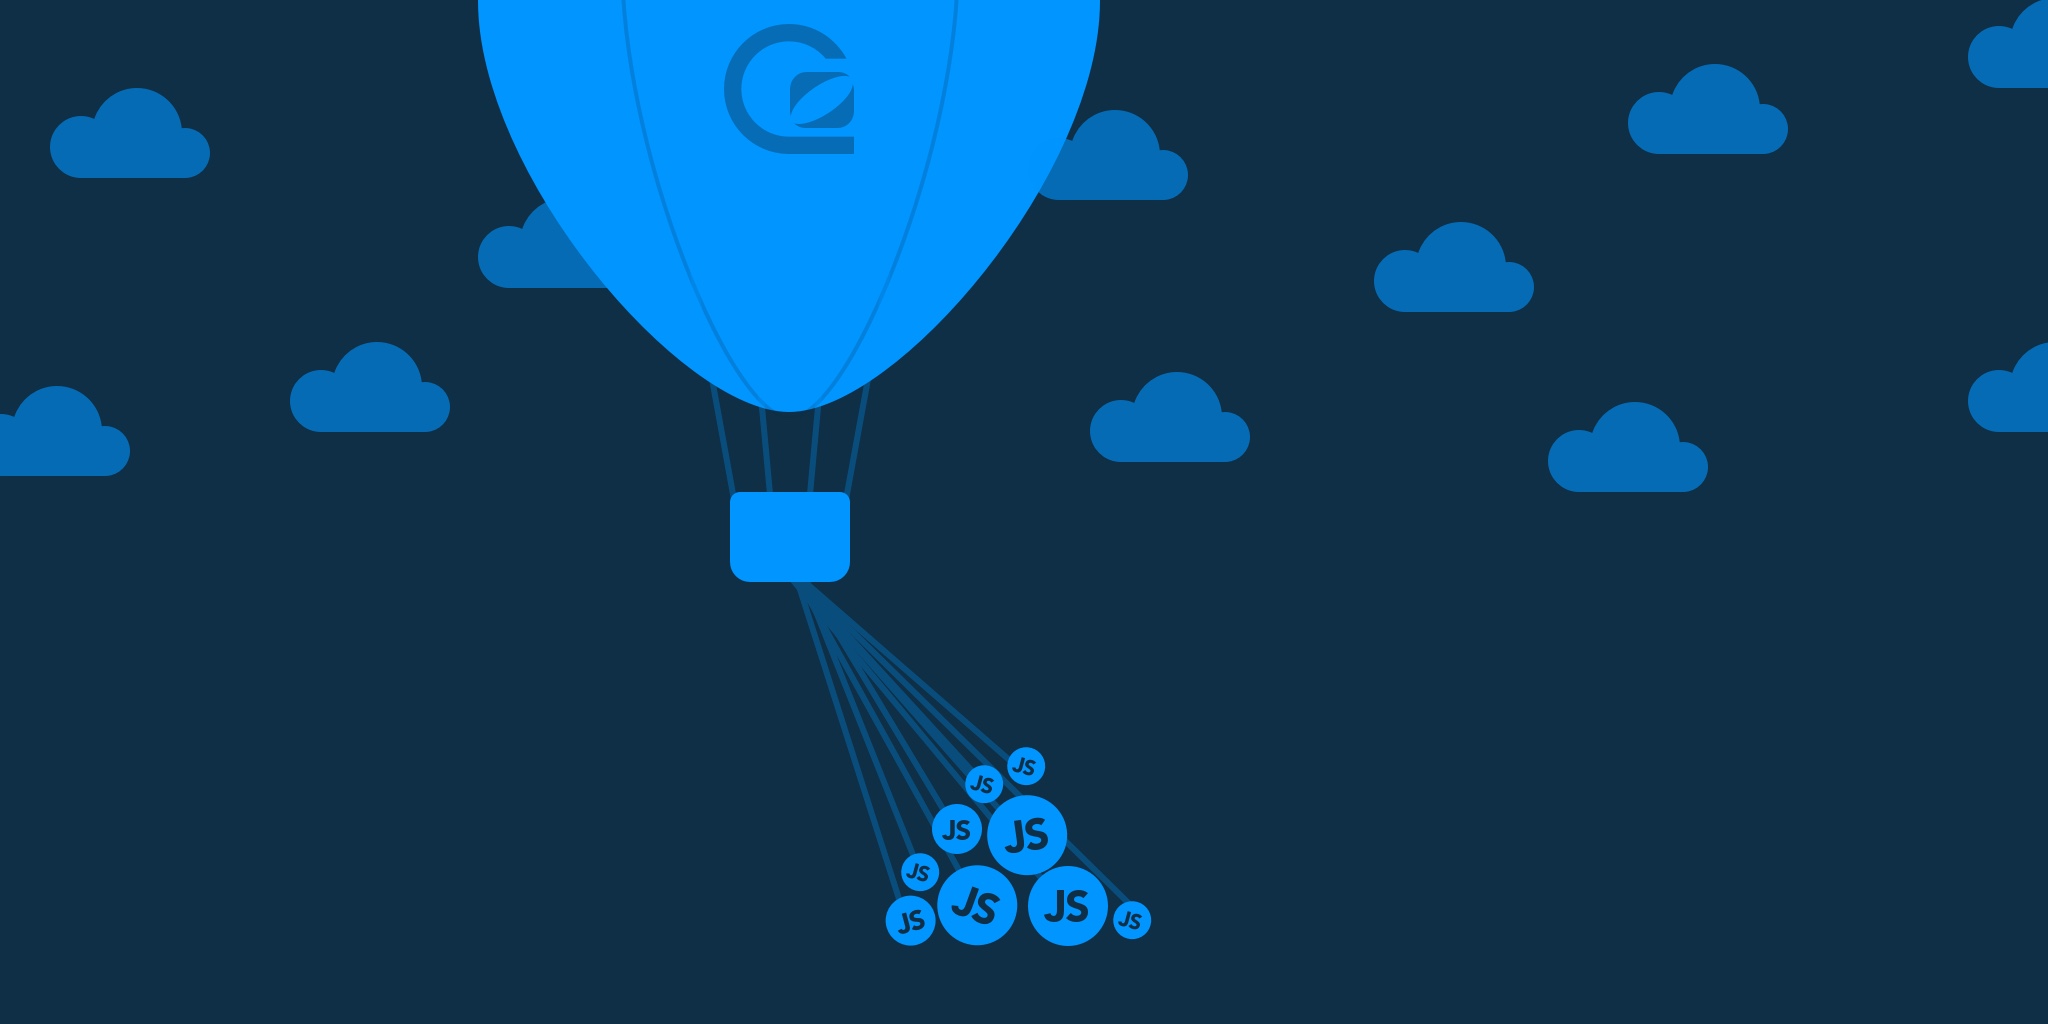 dark blue background with light blue balloon weighed down like your site would be weighed down with code